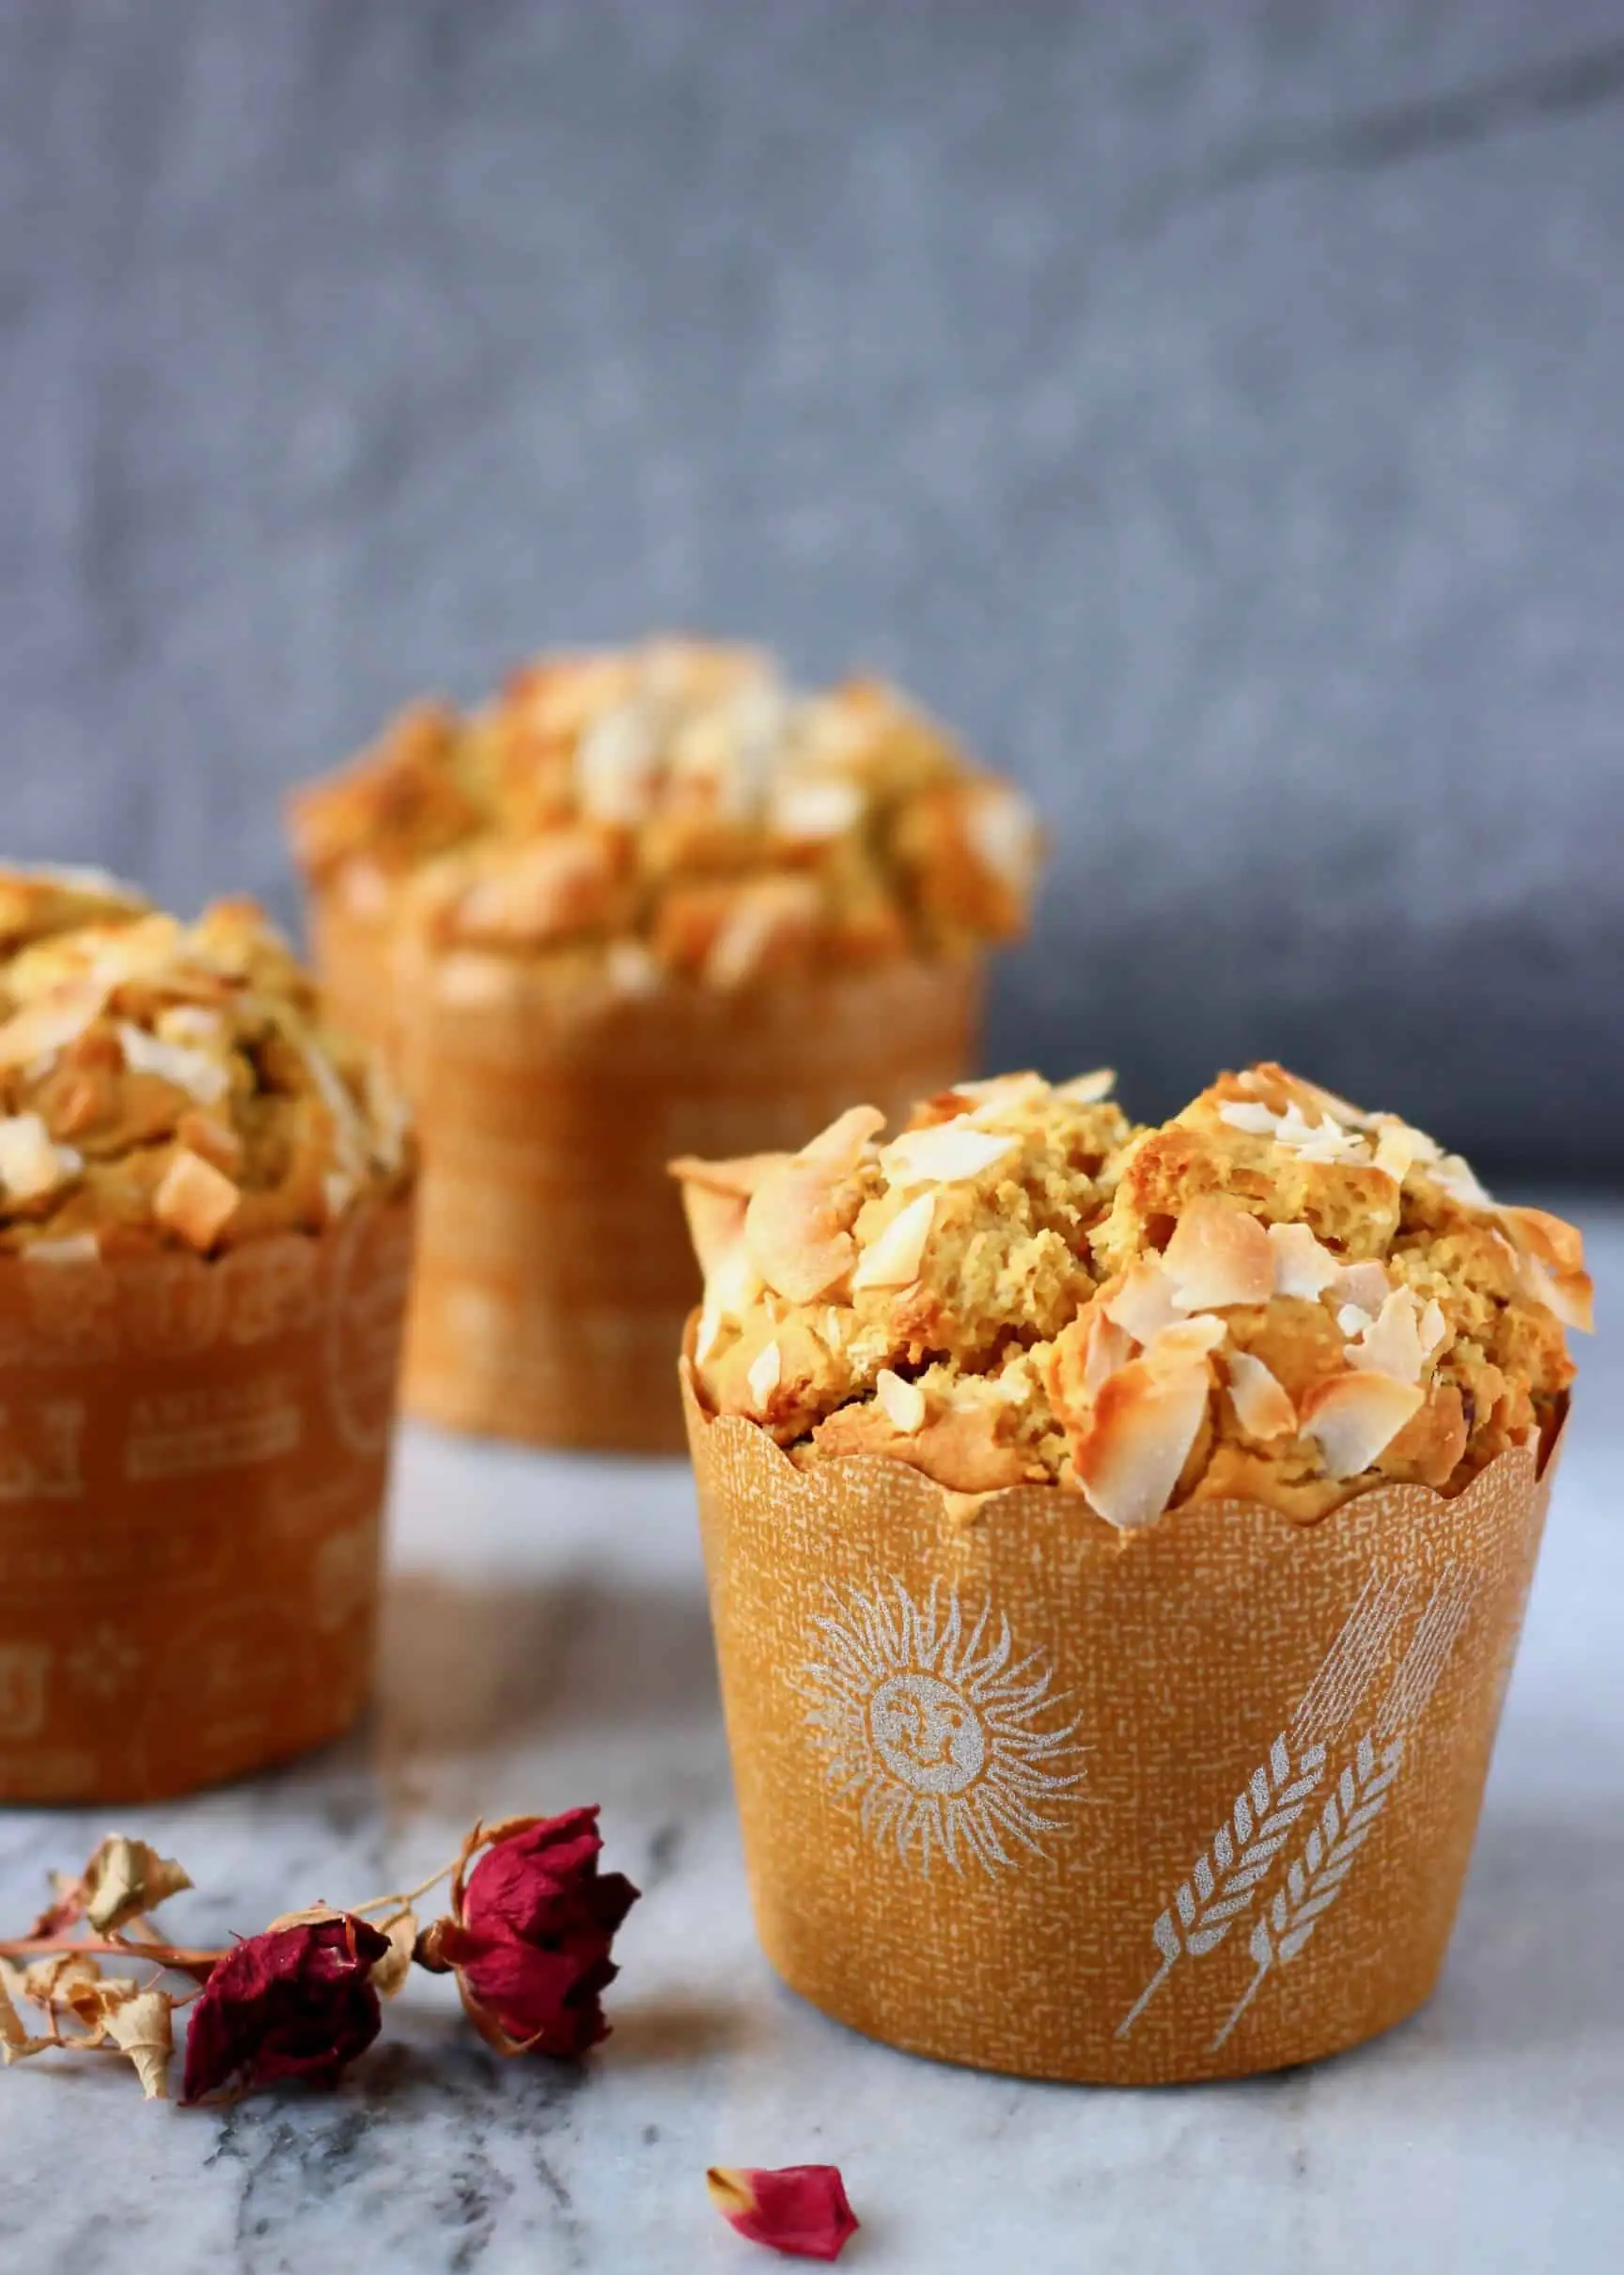 Three carrot muffins topped with coconut flakes on a marble slab decorated with dried roses against a grey fabric background